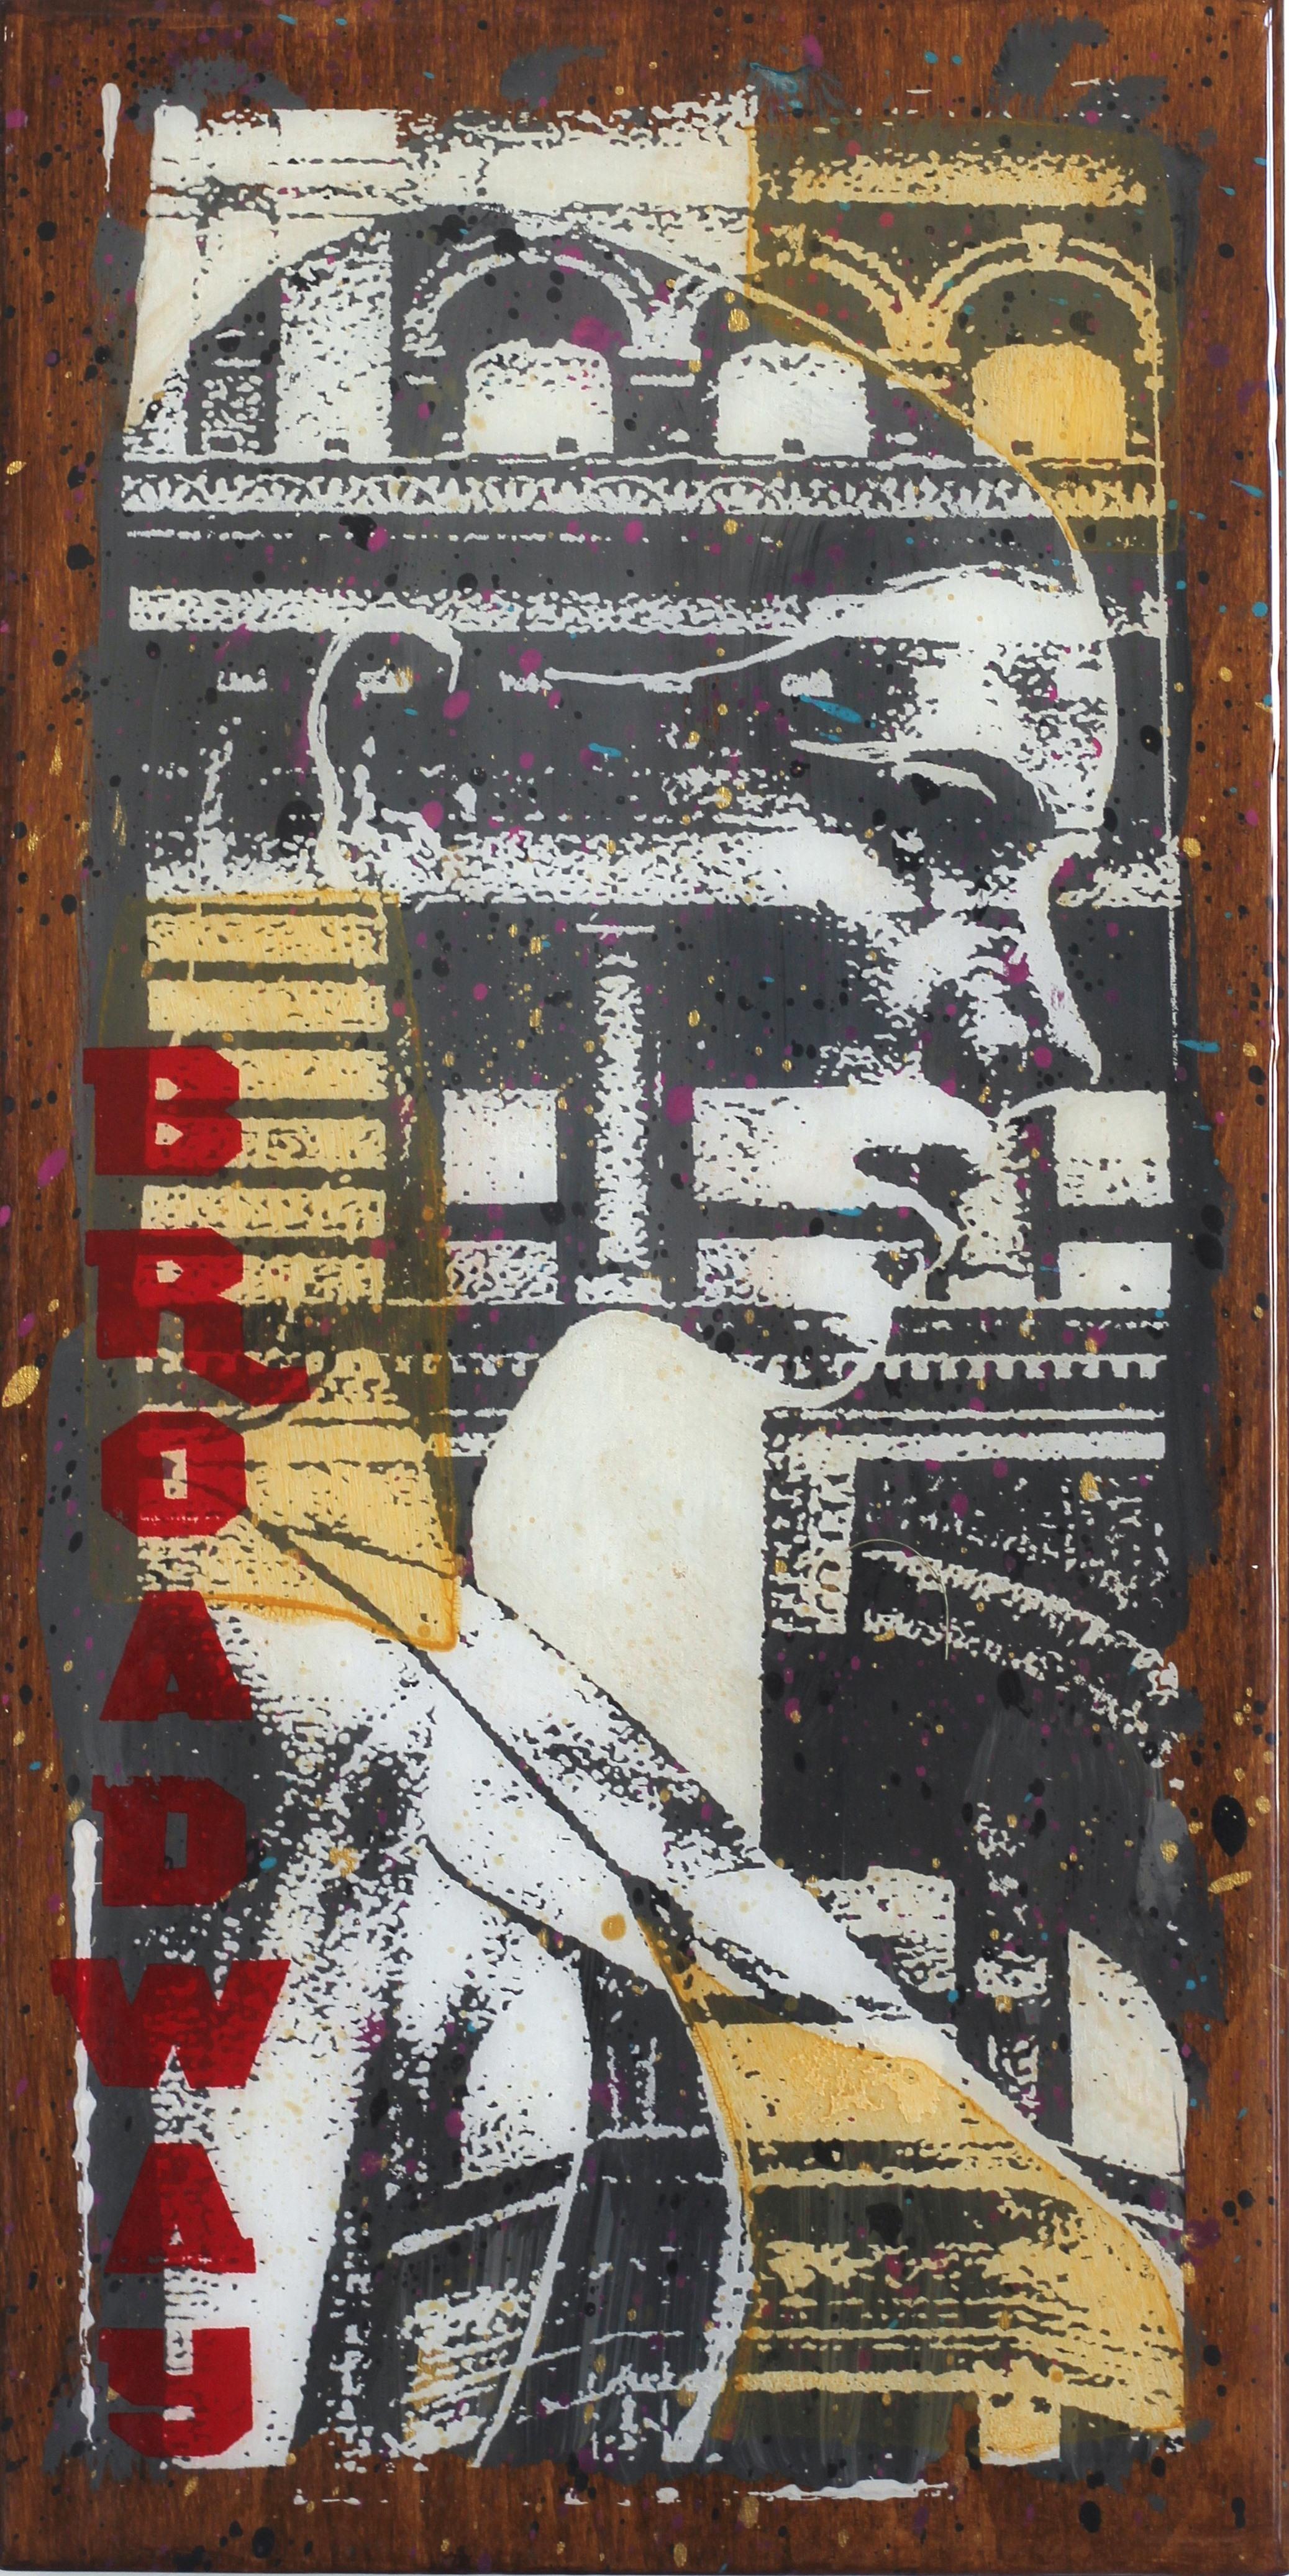 Broadway - Original Mixed Media Painting on Wood Panel with Resin